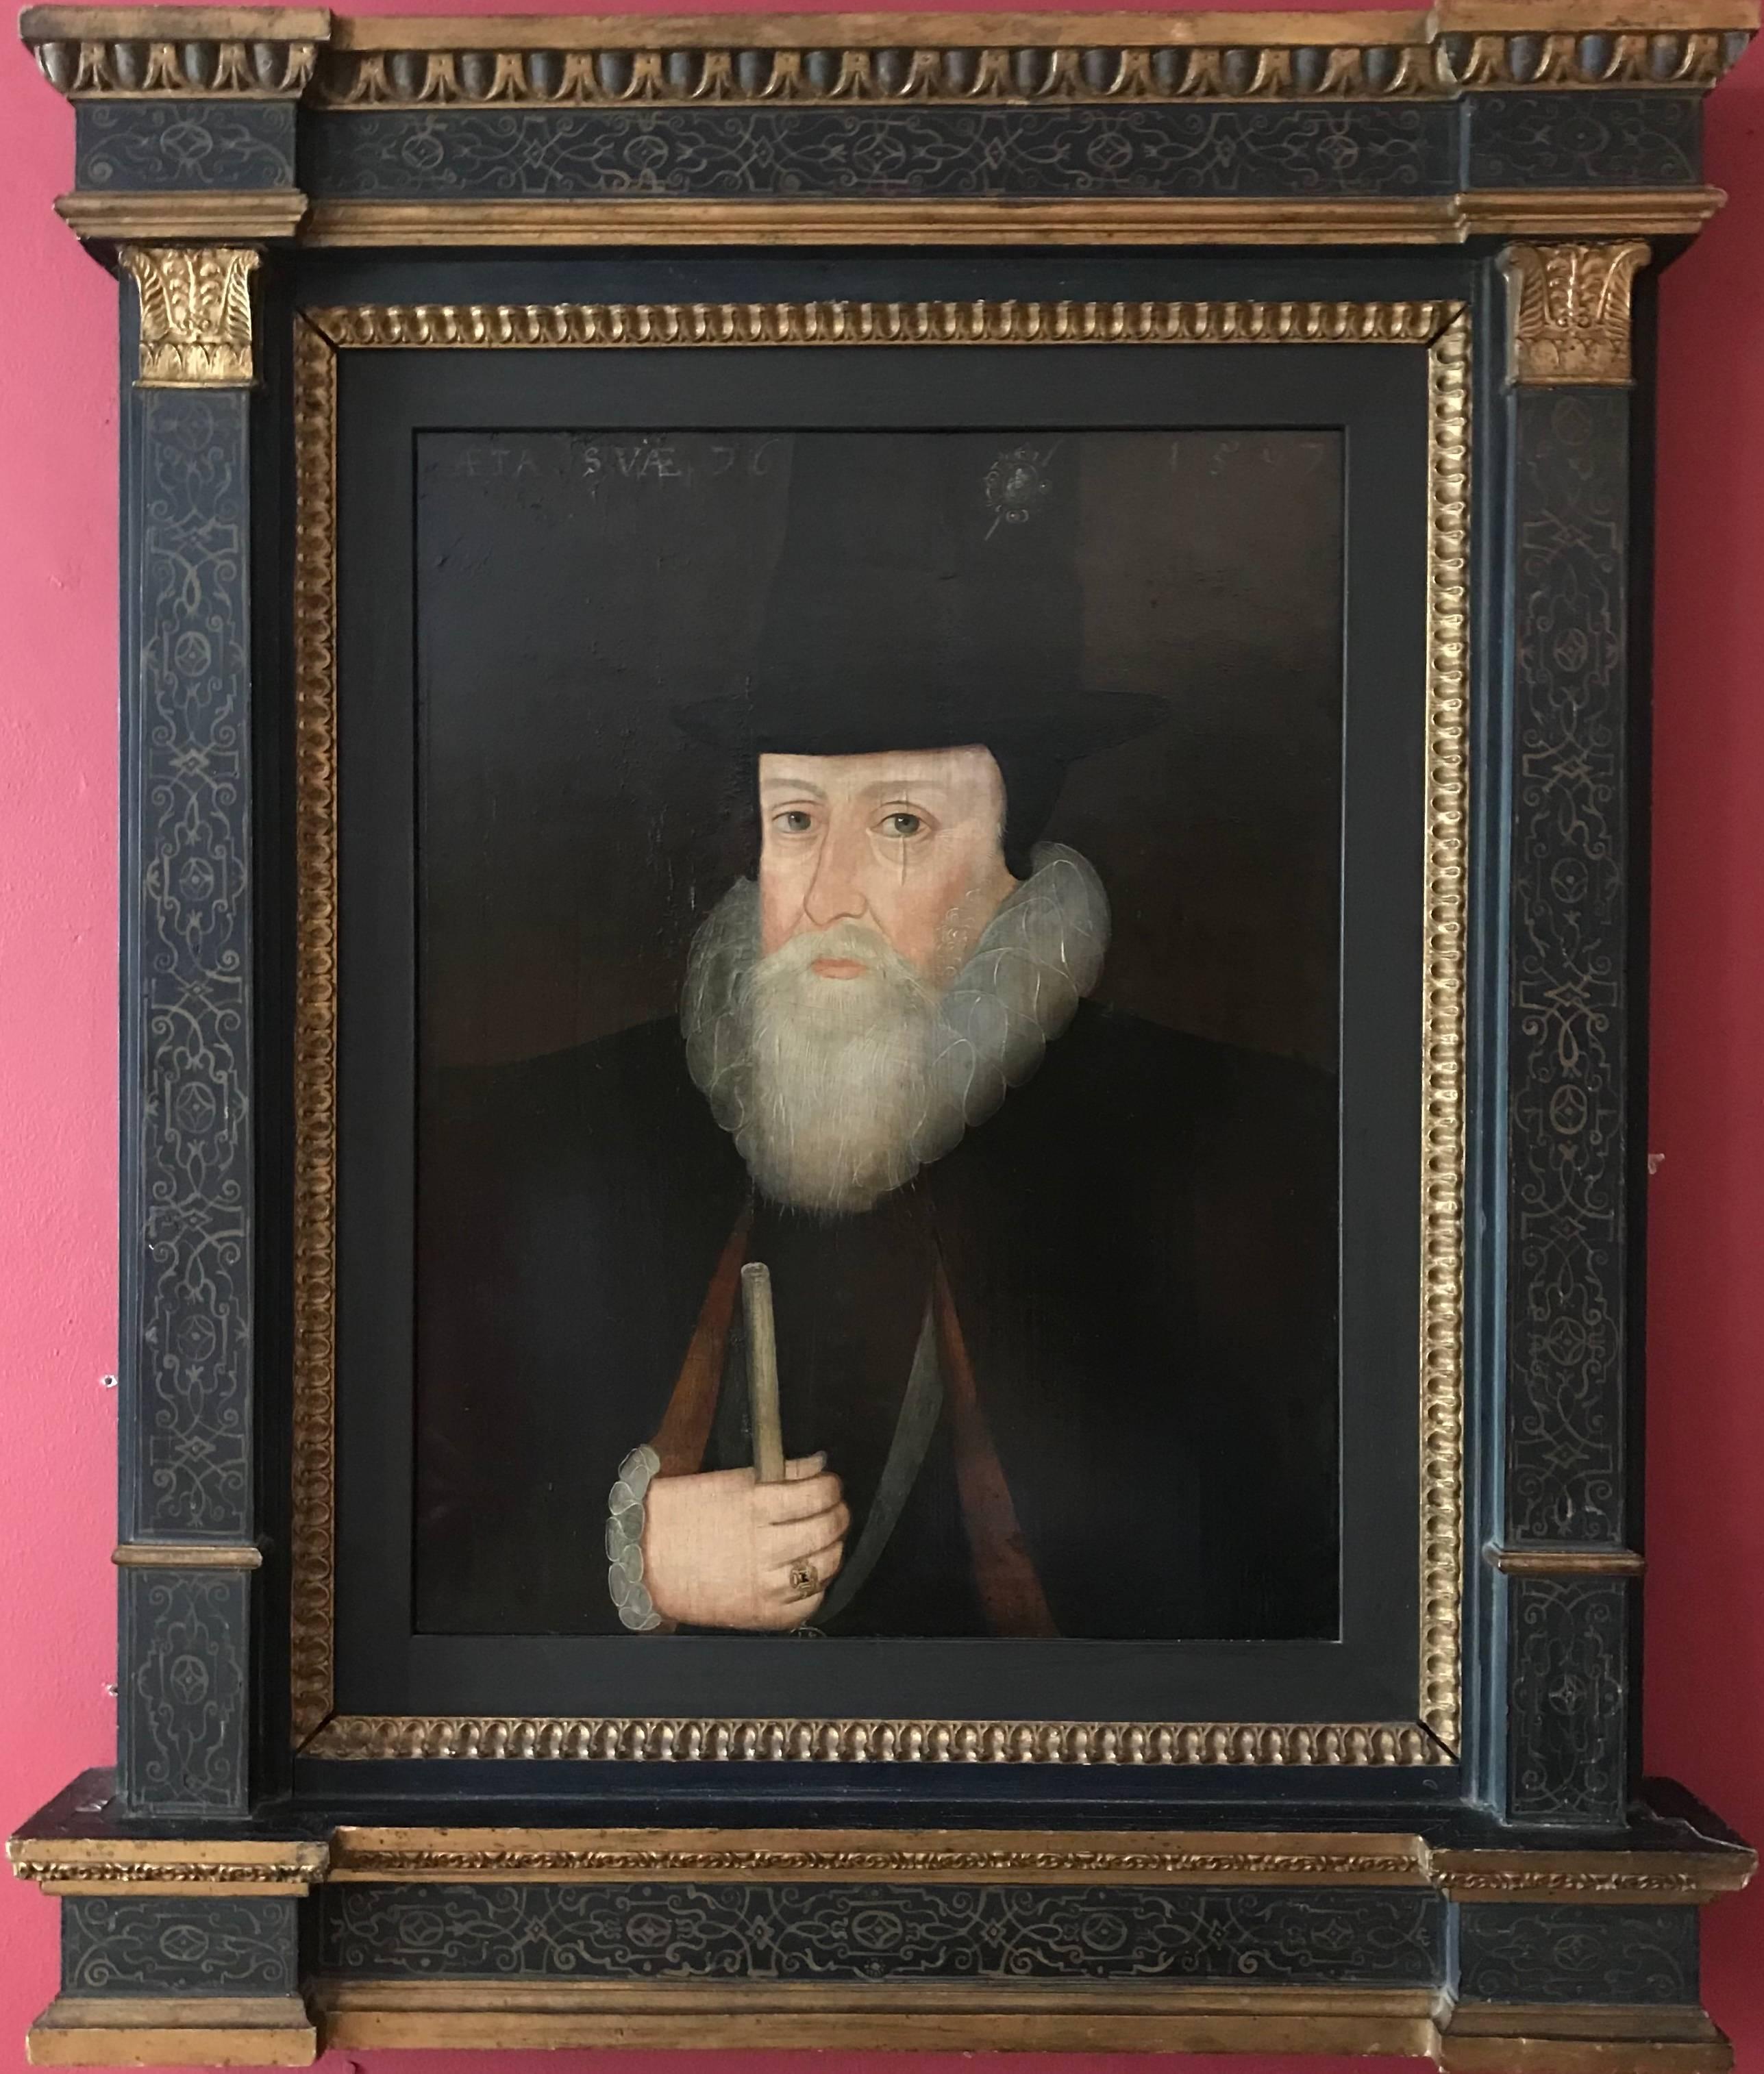 Unknown Portrait Painting - 16th Century Portrait of William Cecil, Lord Burghley, original period painting